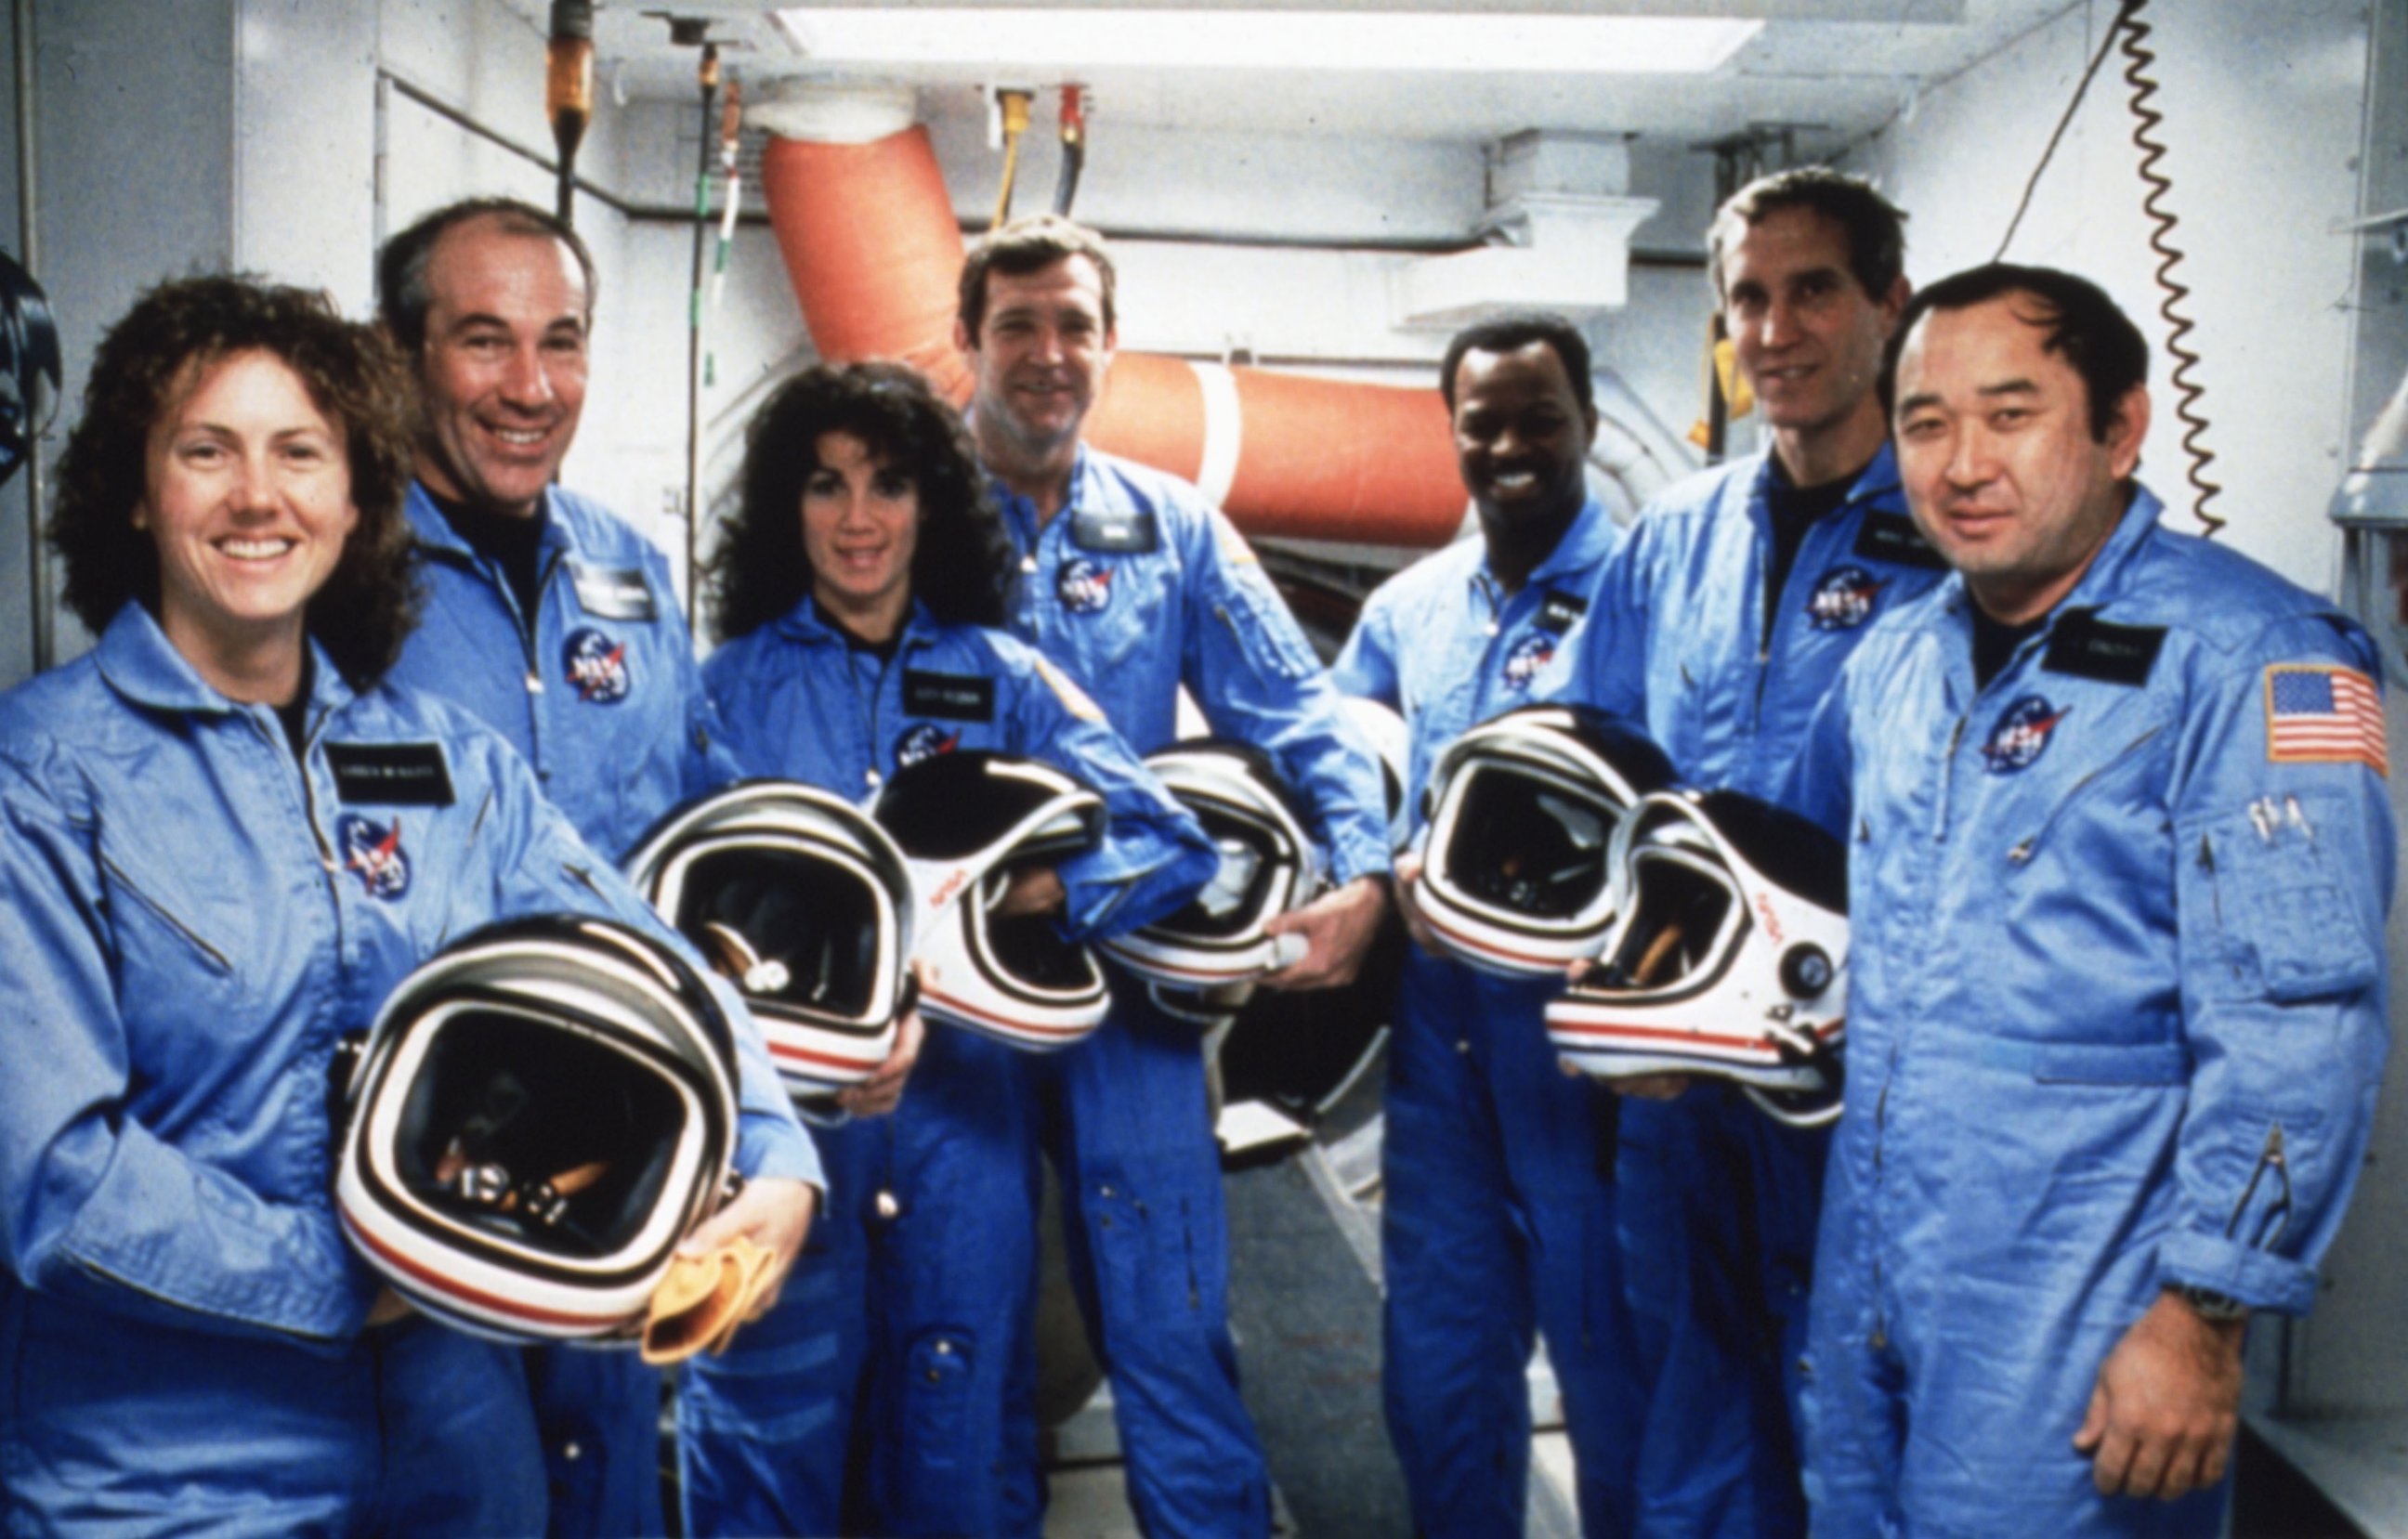 30 Years Since the Space Shuttle Challenger Disaster Photos | Image #91 - ABC News